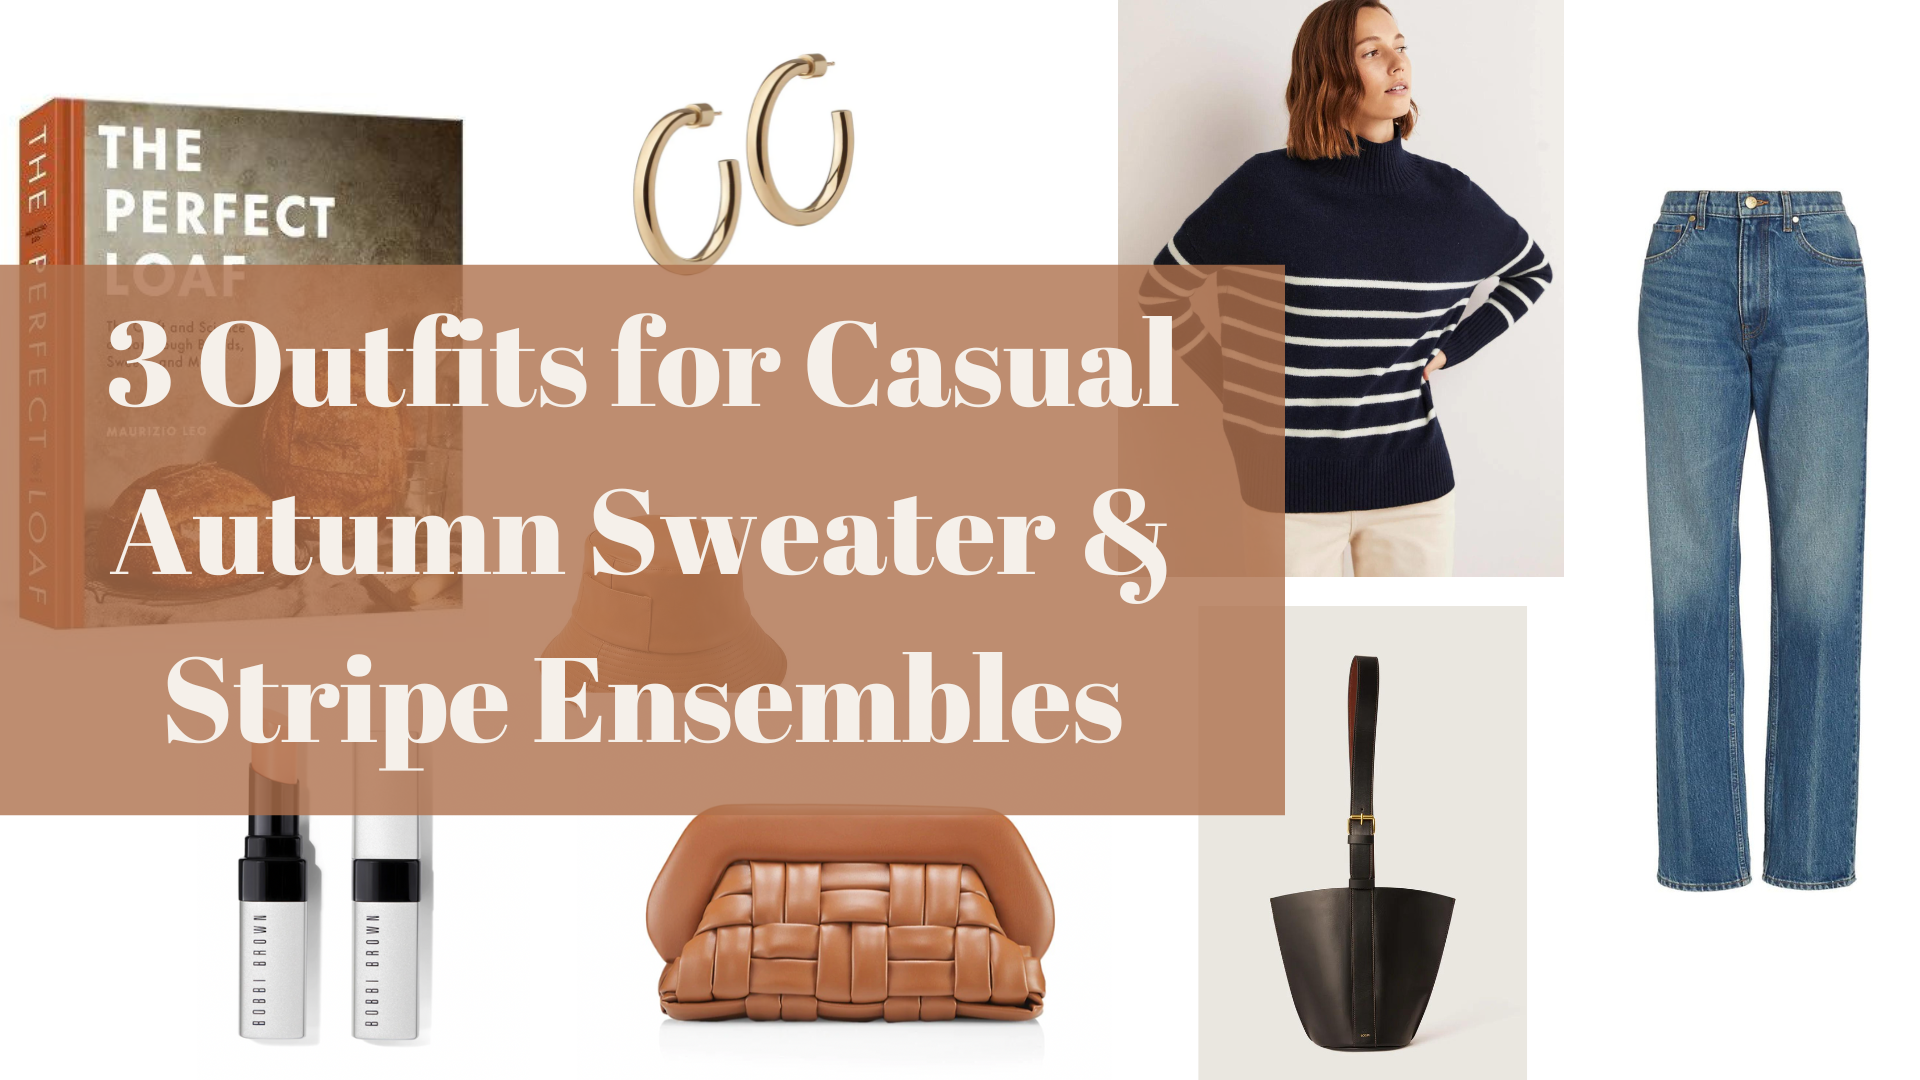 Outfits of the Month (3): Casual Autumn Sweater and Stripe Ensembles